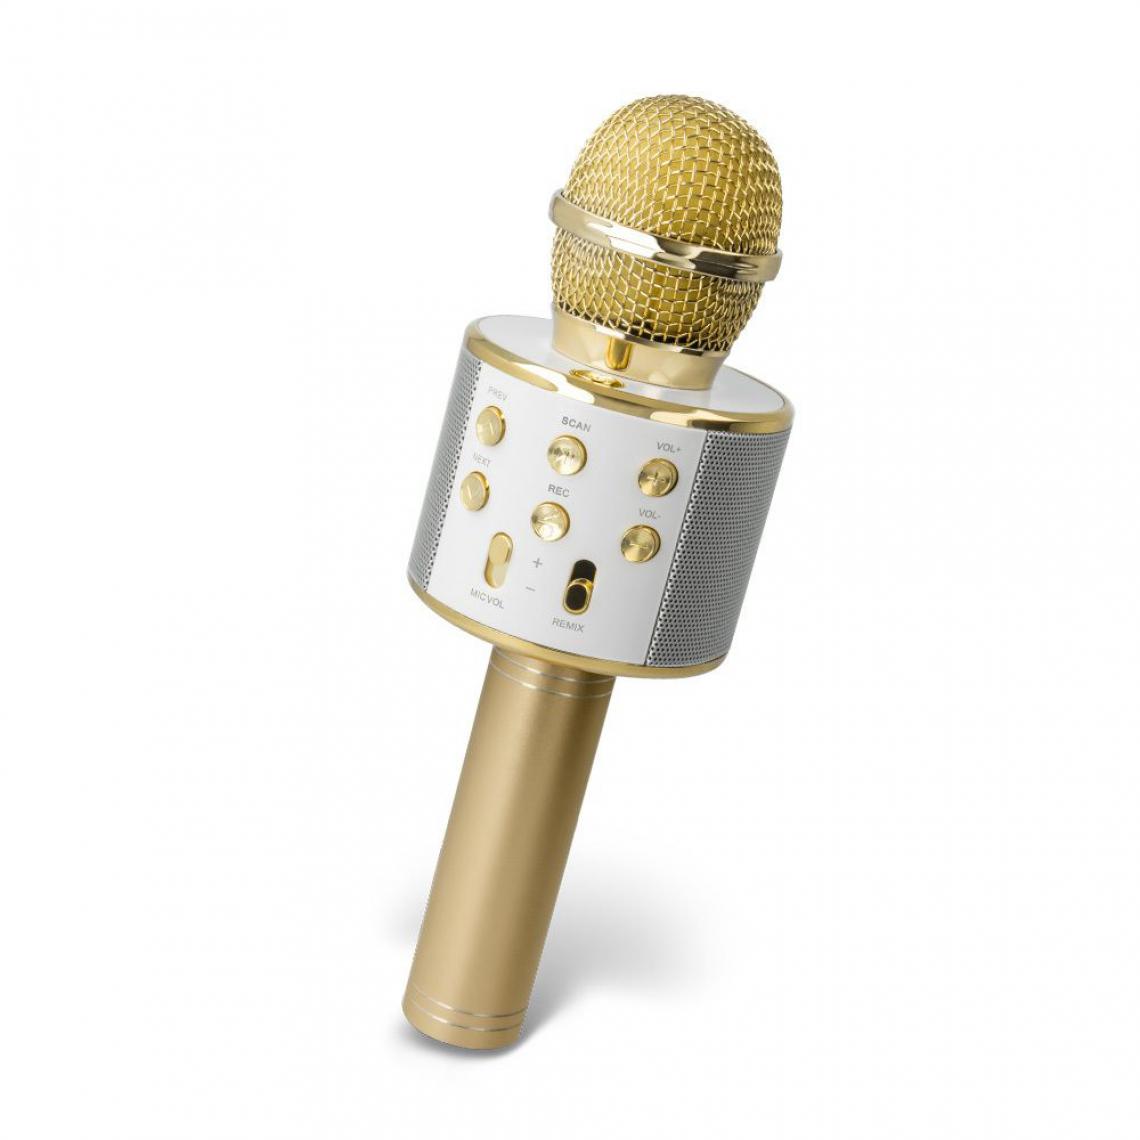 Ozzzo - Microphone Karaoke bluetooth haut parleur ozzzo Gold Or pour Huawei Honor Play 9A - Autres accessoires smartphone